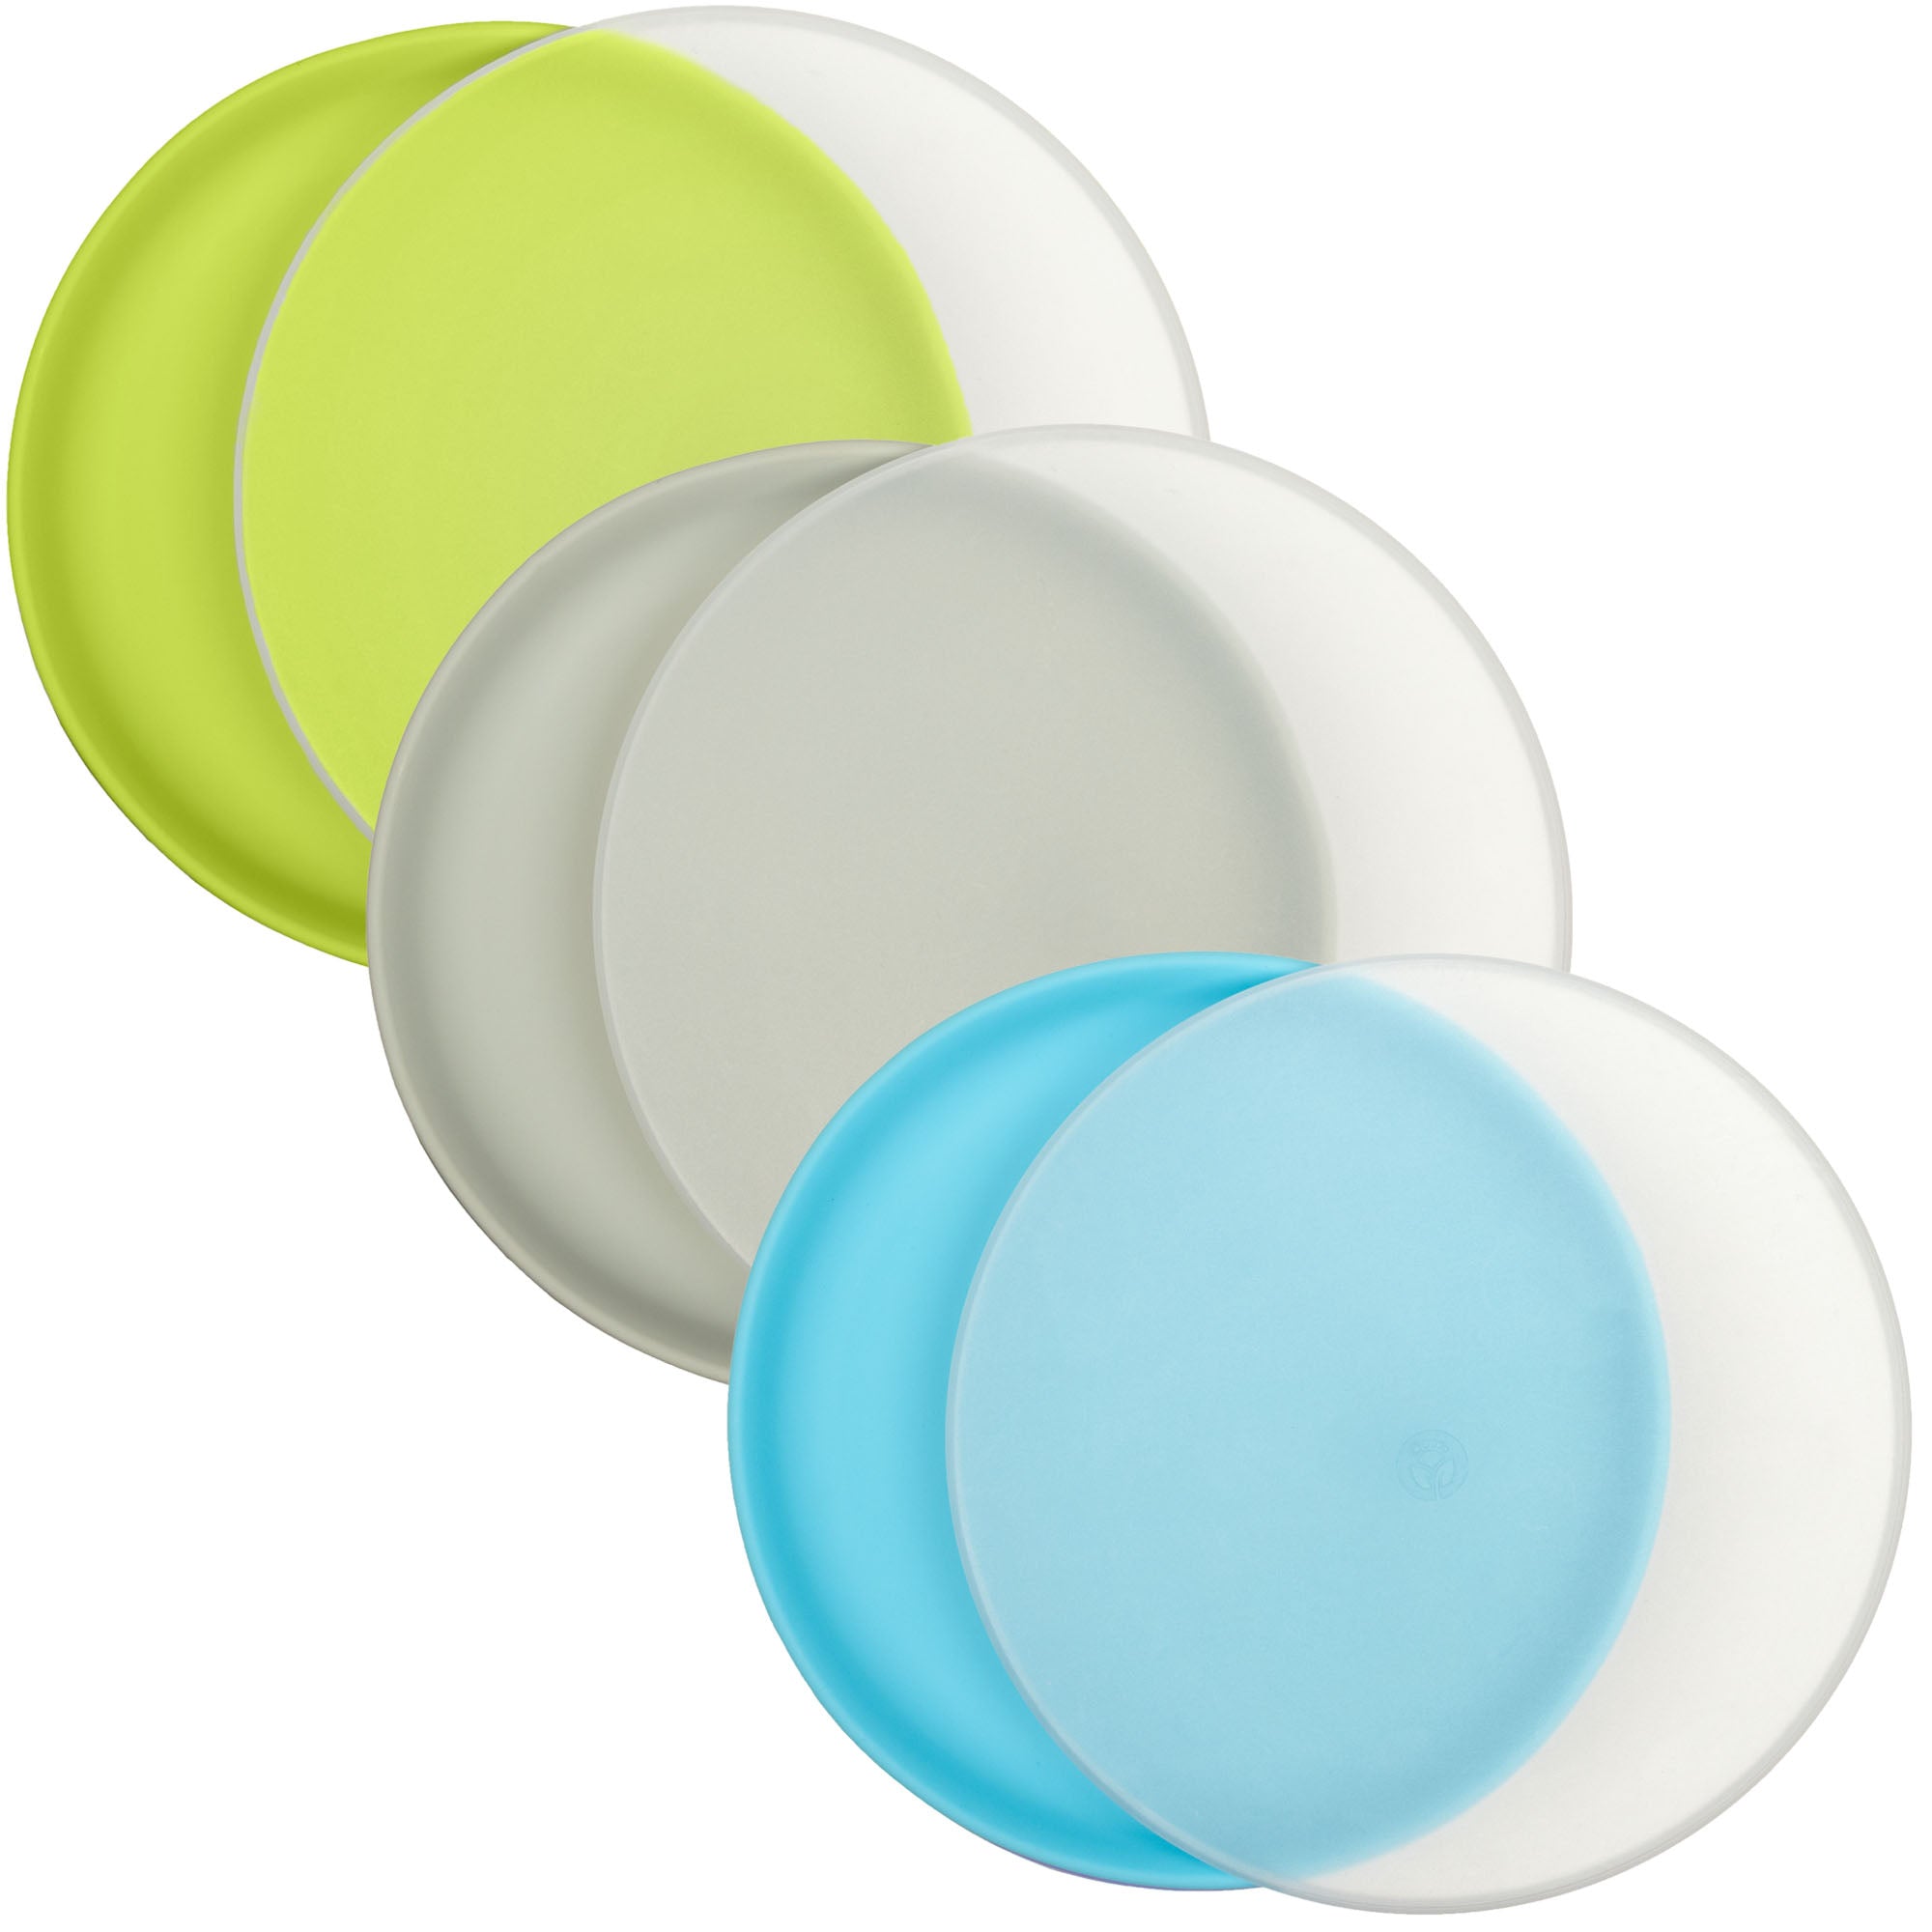 WeeSprout 100% Silicone Plates for Toddlers | 3 PC Set | Divided Baby Plates | Non-Toxic, BPA Free & FDA/LFGB Certified | Dishwasher/Microwave Safe 